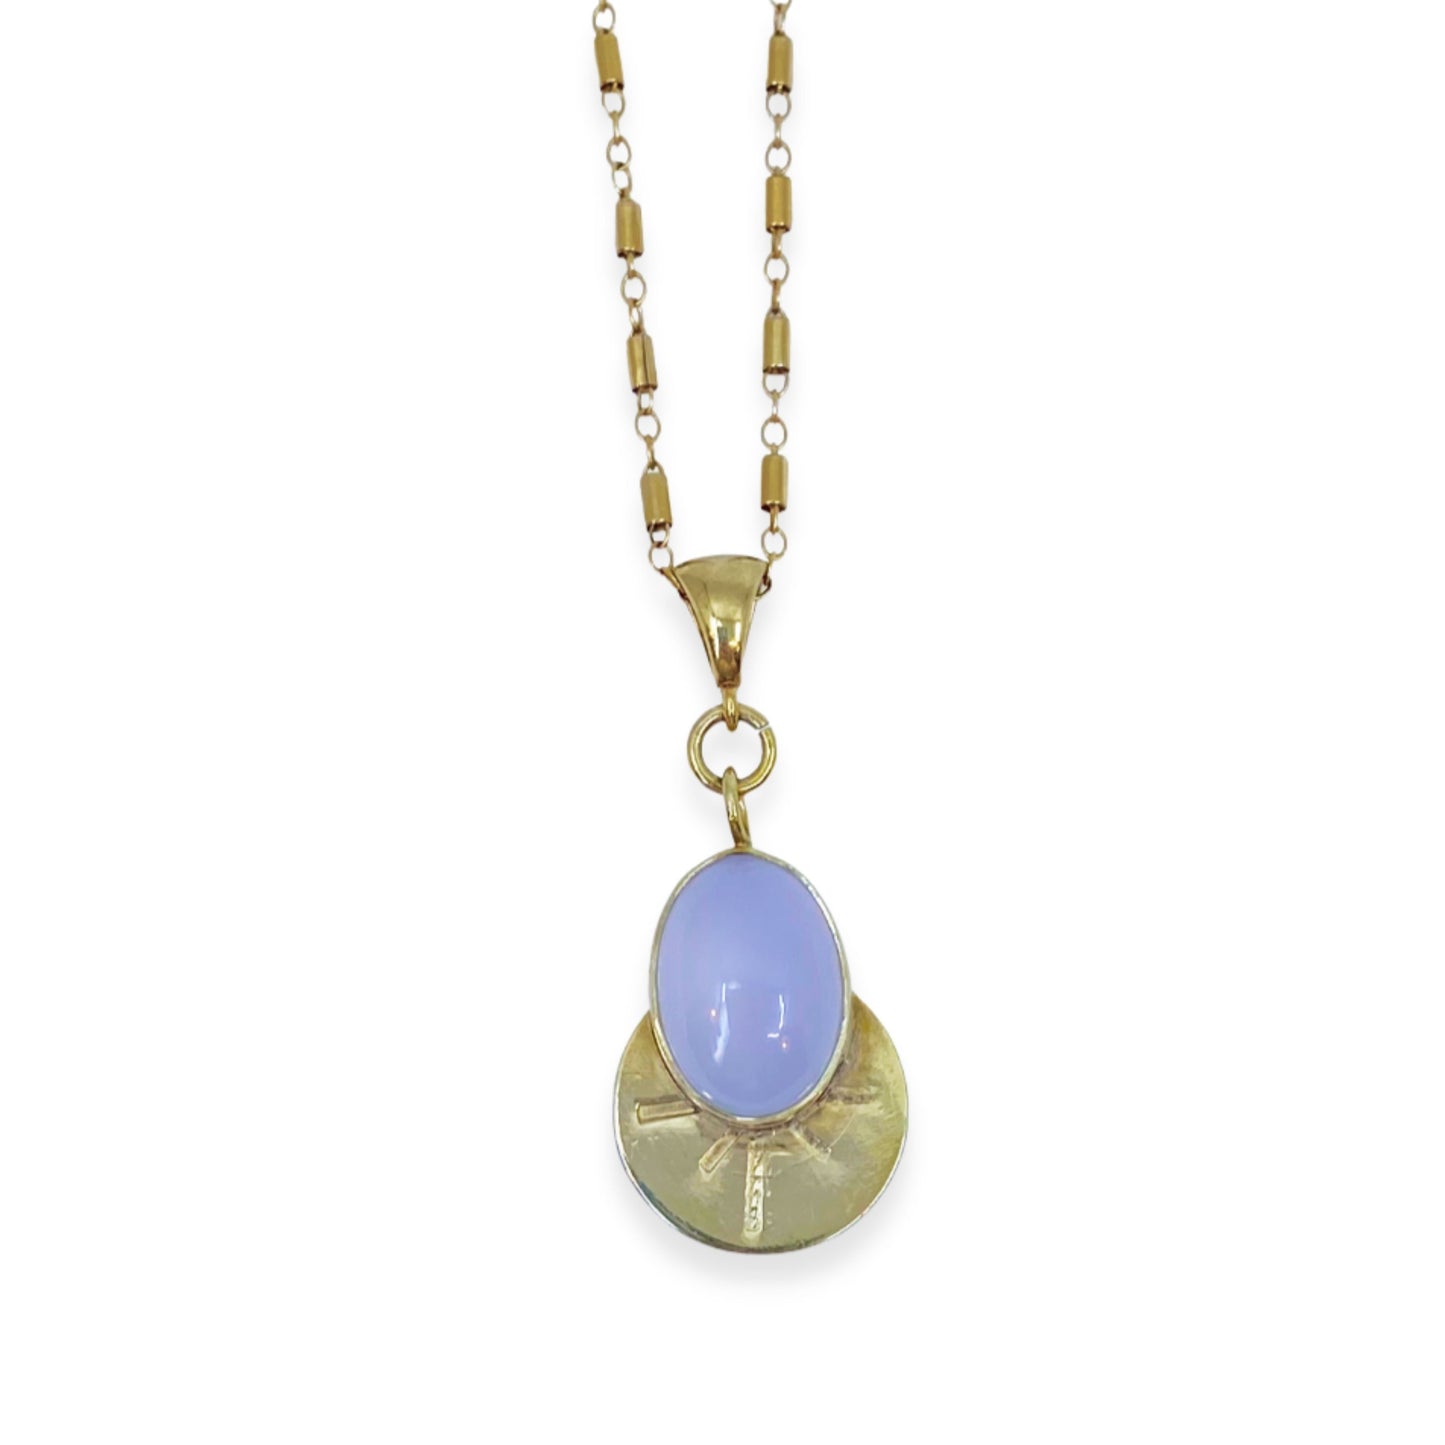 Gold, decorative chain, with Chalcedony pendant pictured on white background